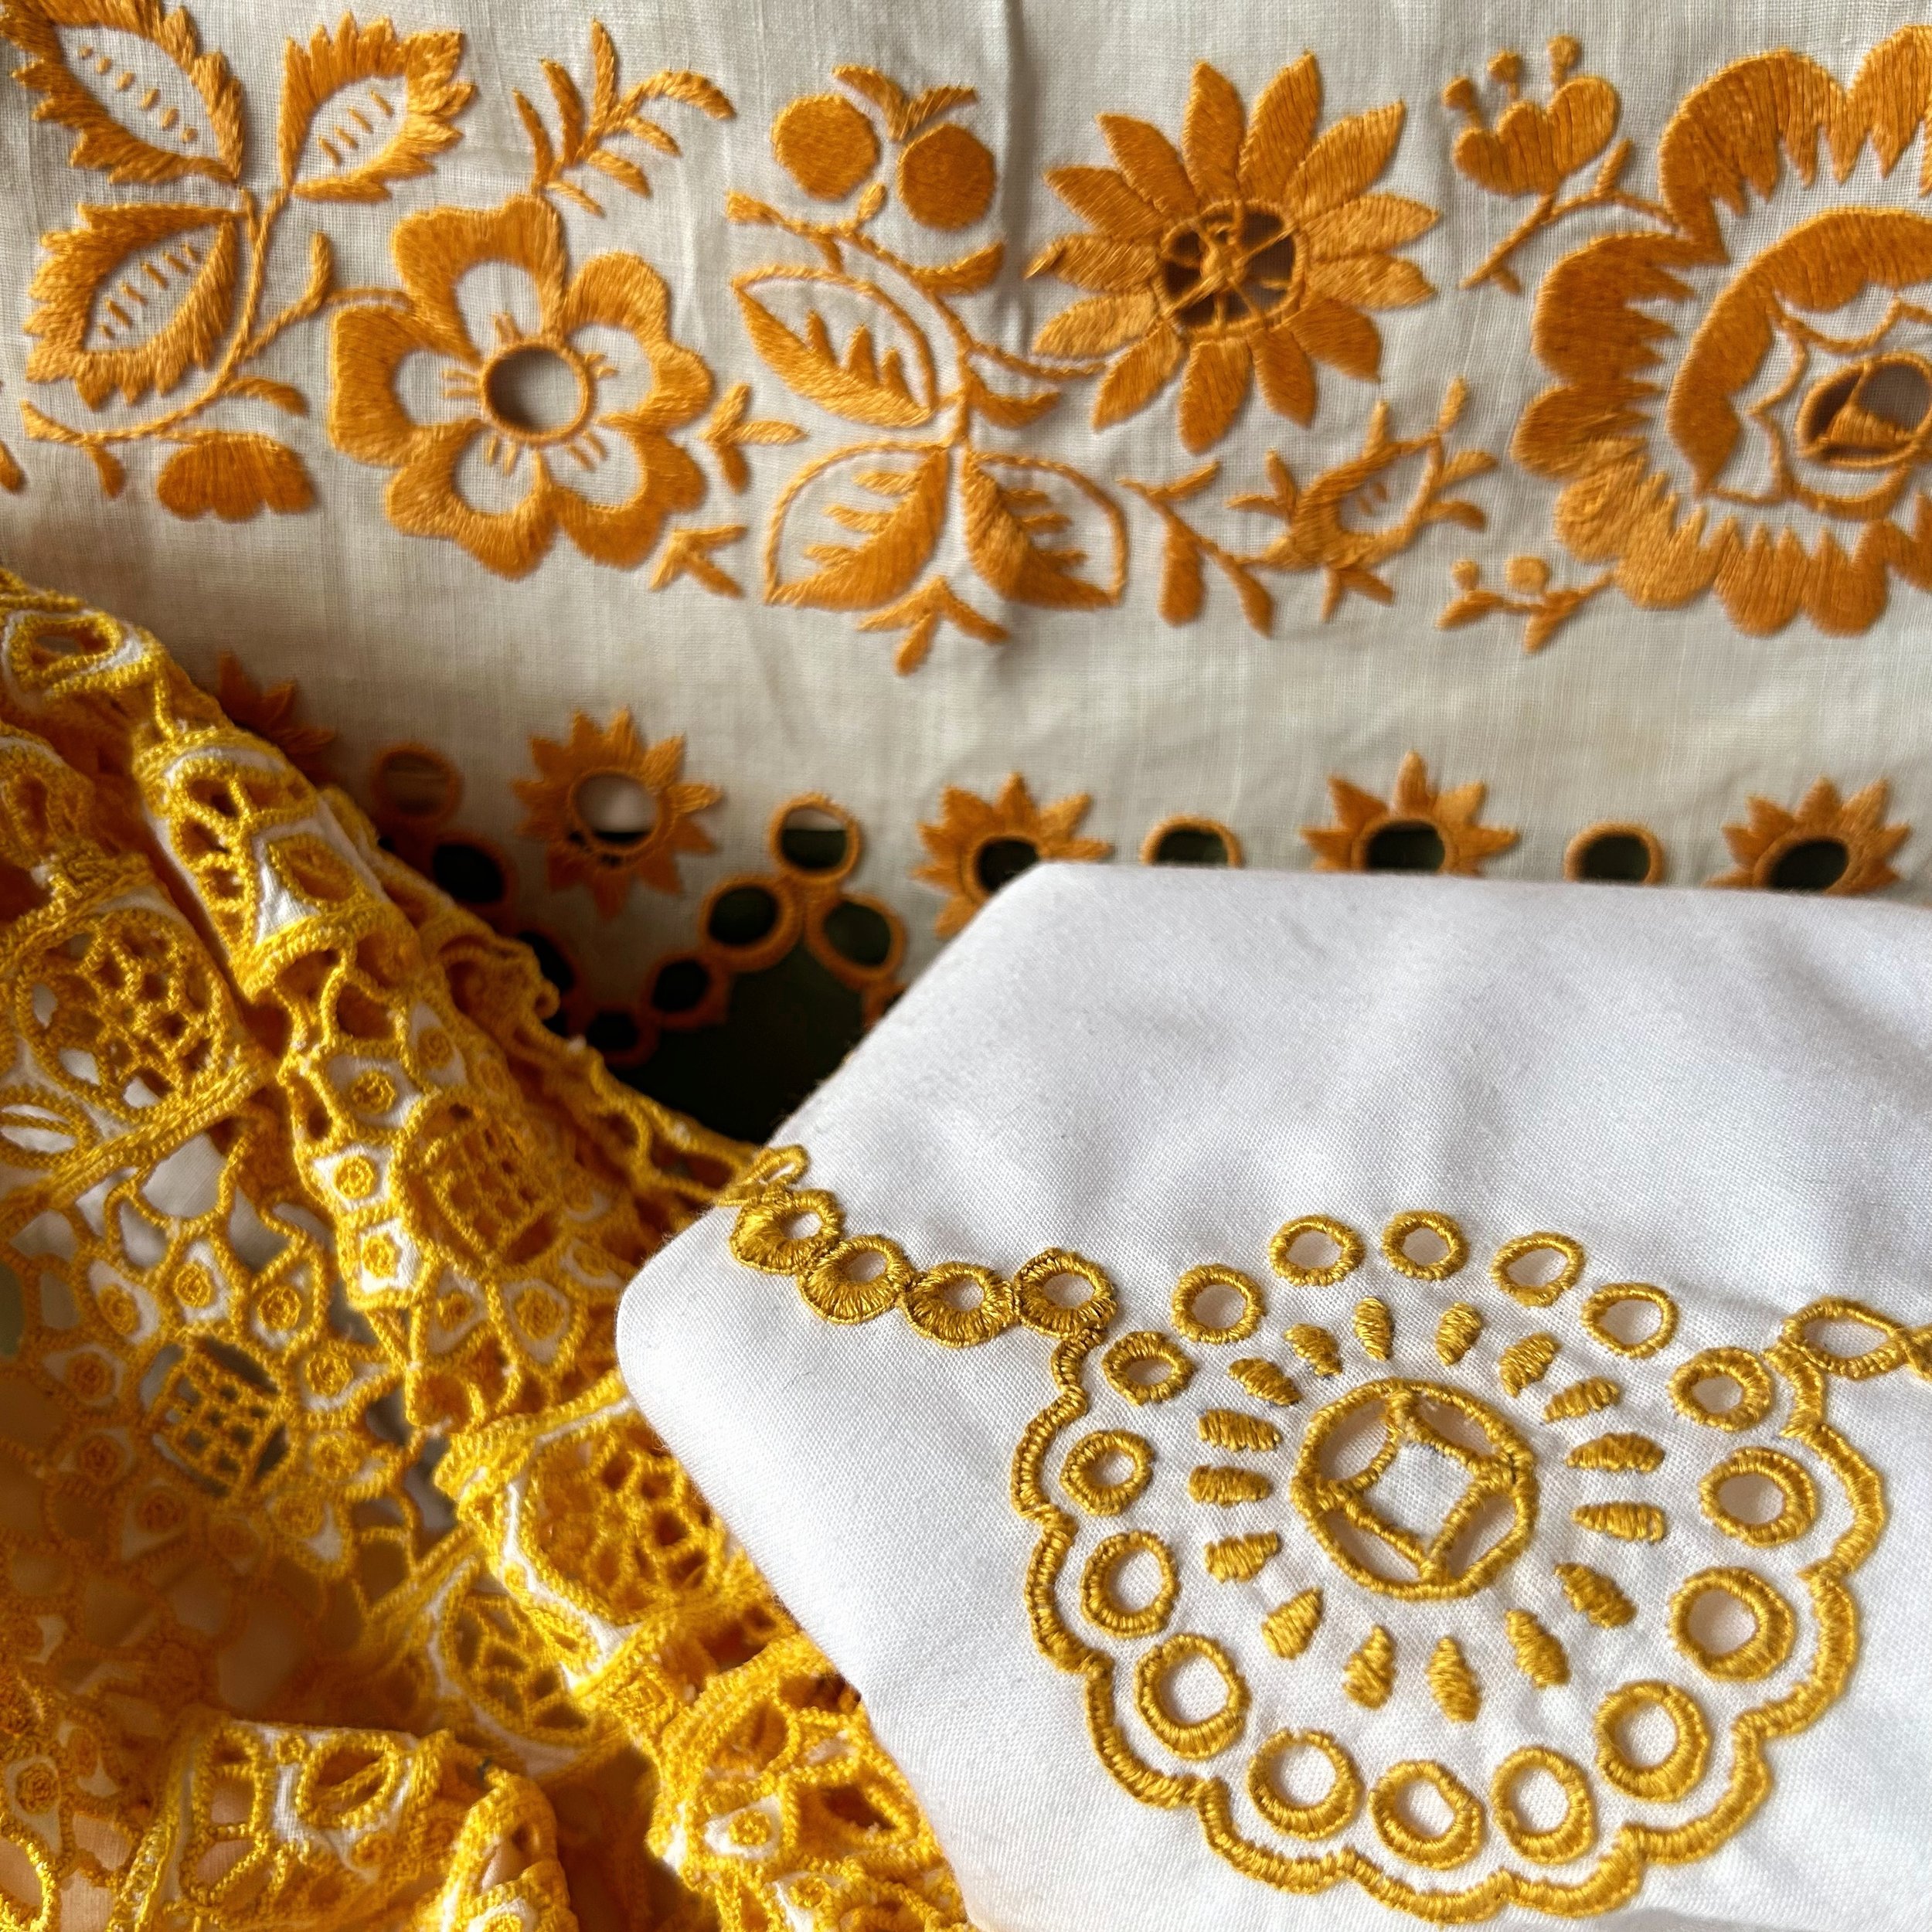 Stitch eyelets with me in person in Arnhem, NL on Saturday, May 18! We&rsquo;ll look at the traditions from the Czech Republic and Slovakia and create this beautiful lace-like embellishment used on aprons, sleeves, and more. I&rsquo;m grateful to be 